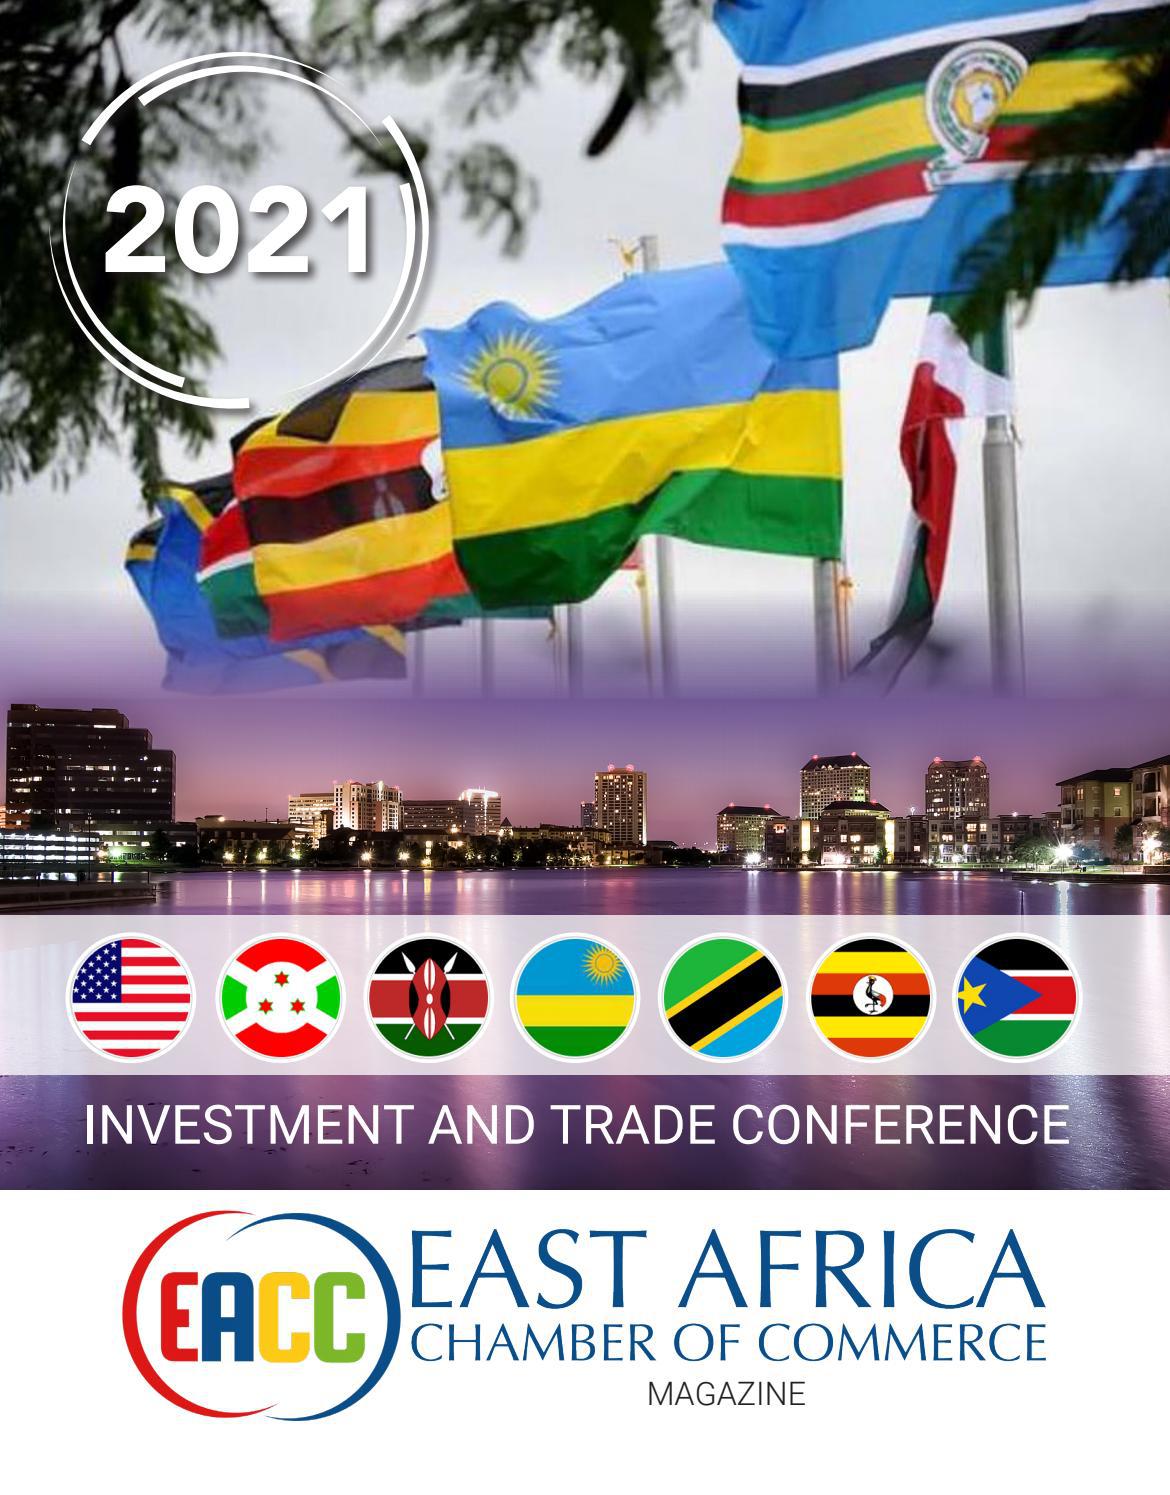 East Africa Chamber of Commerce 2021 Investment and Trade Conference Magazine